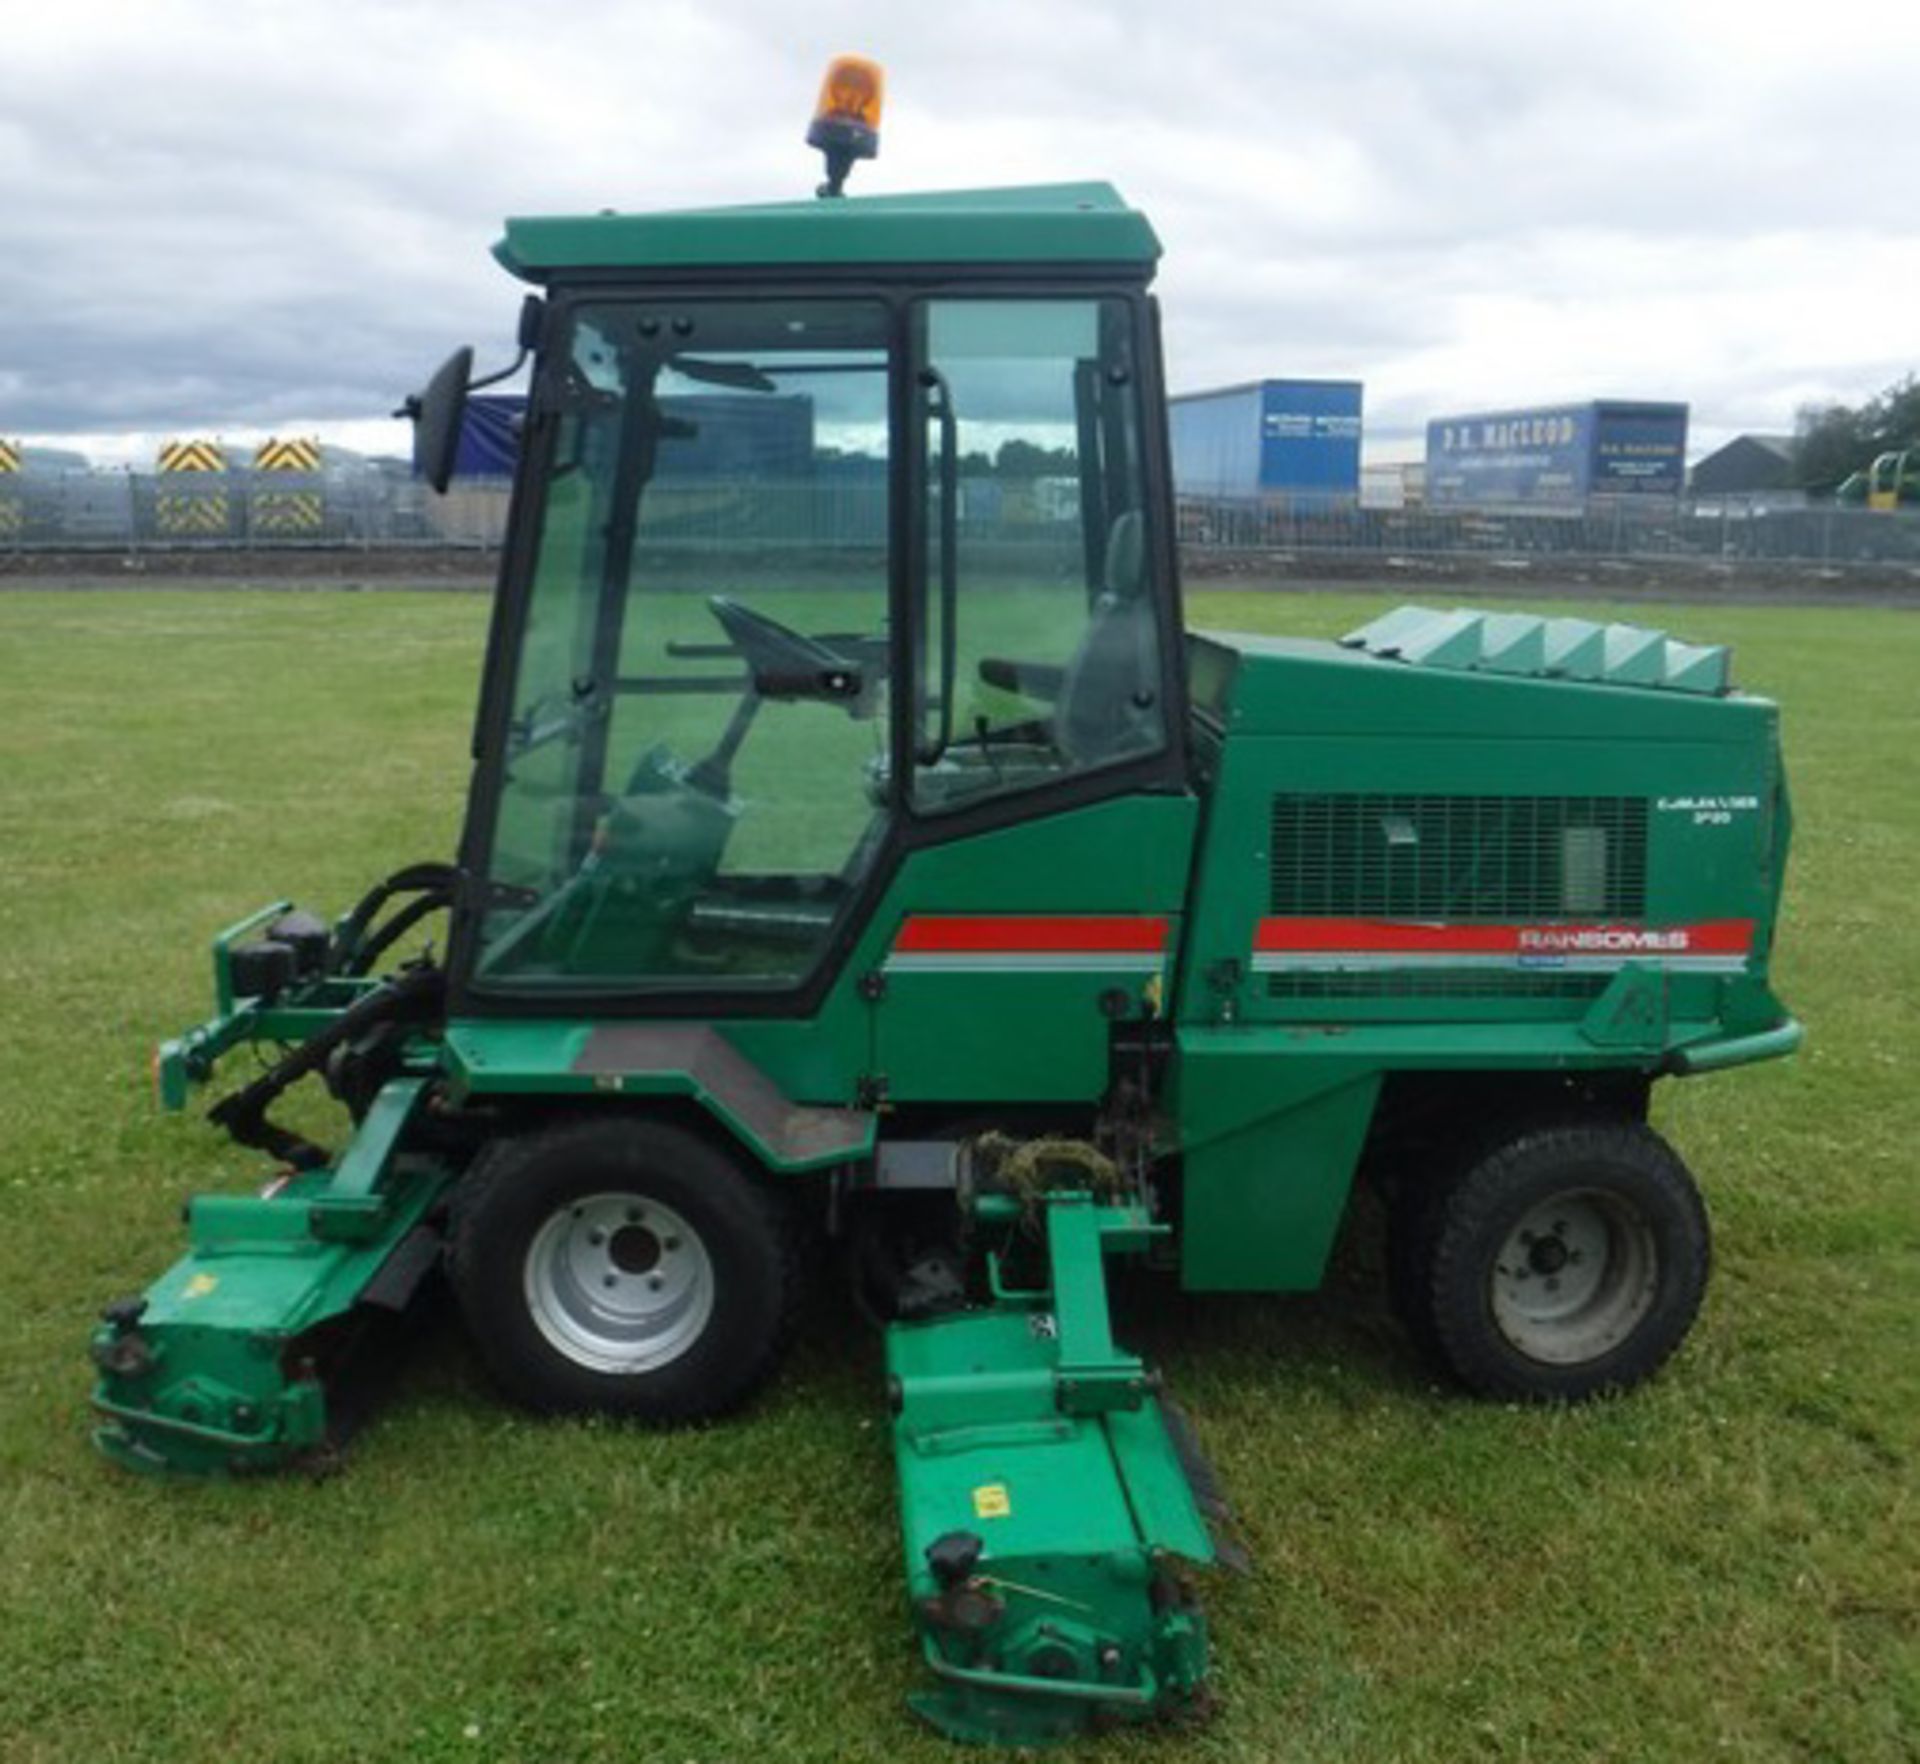 2003 RANSOMES 5 Gang ride on mower. Reg No SN03HLD. 4407hrs (correct) c/w Ransomes safety cab - Image 32 of 34